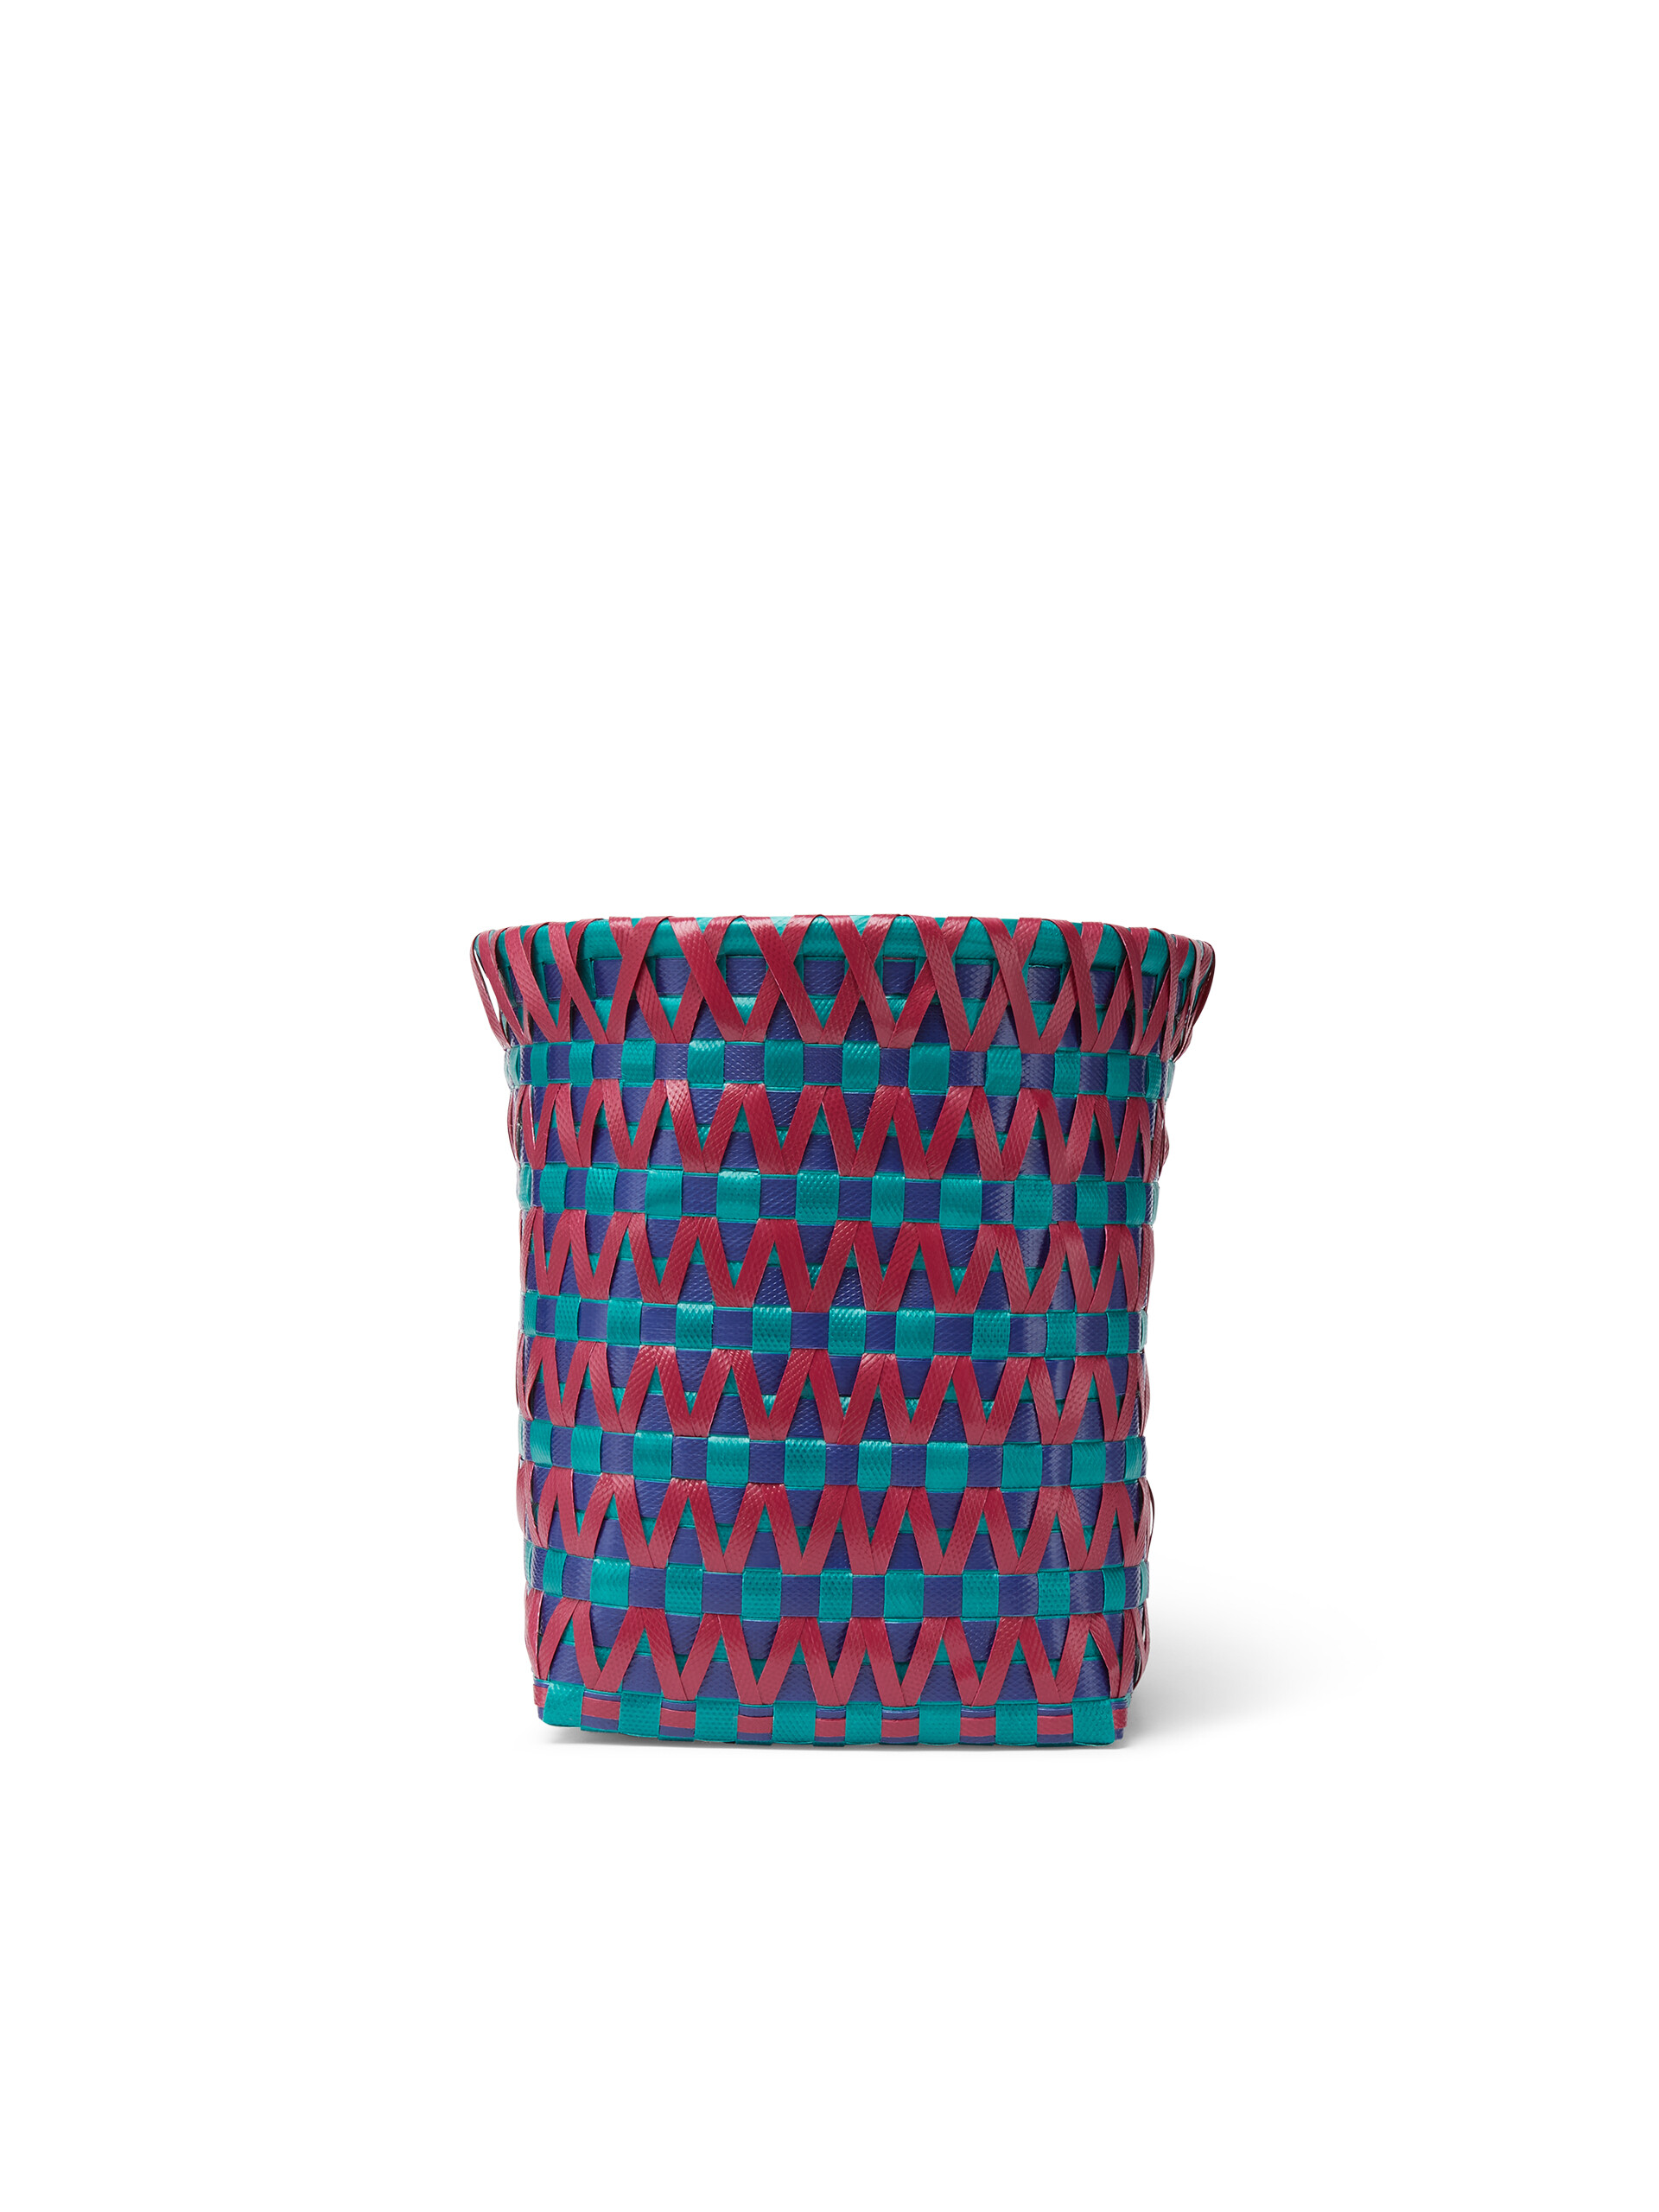 MARNI MARKET blue and burgundy woven basket - Accessories - Image 3